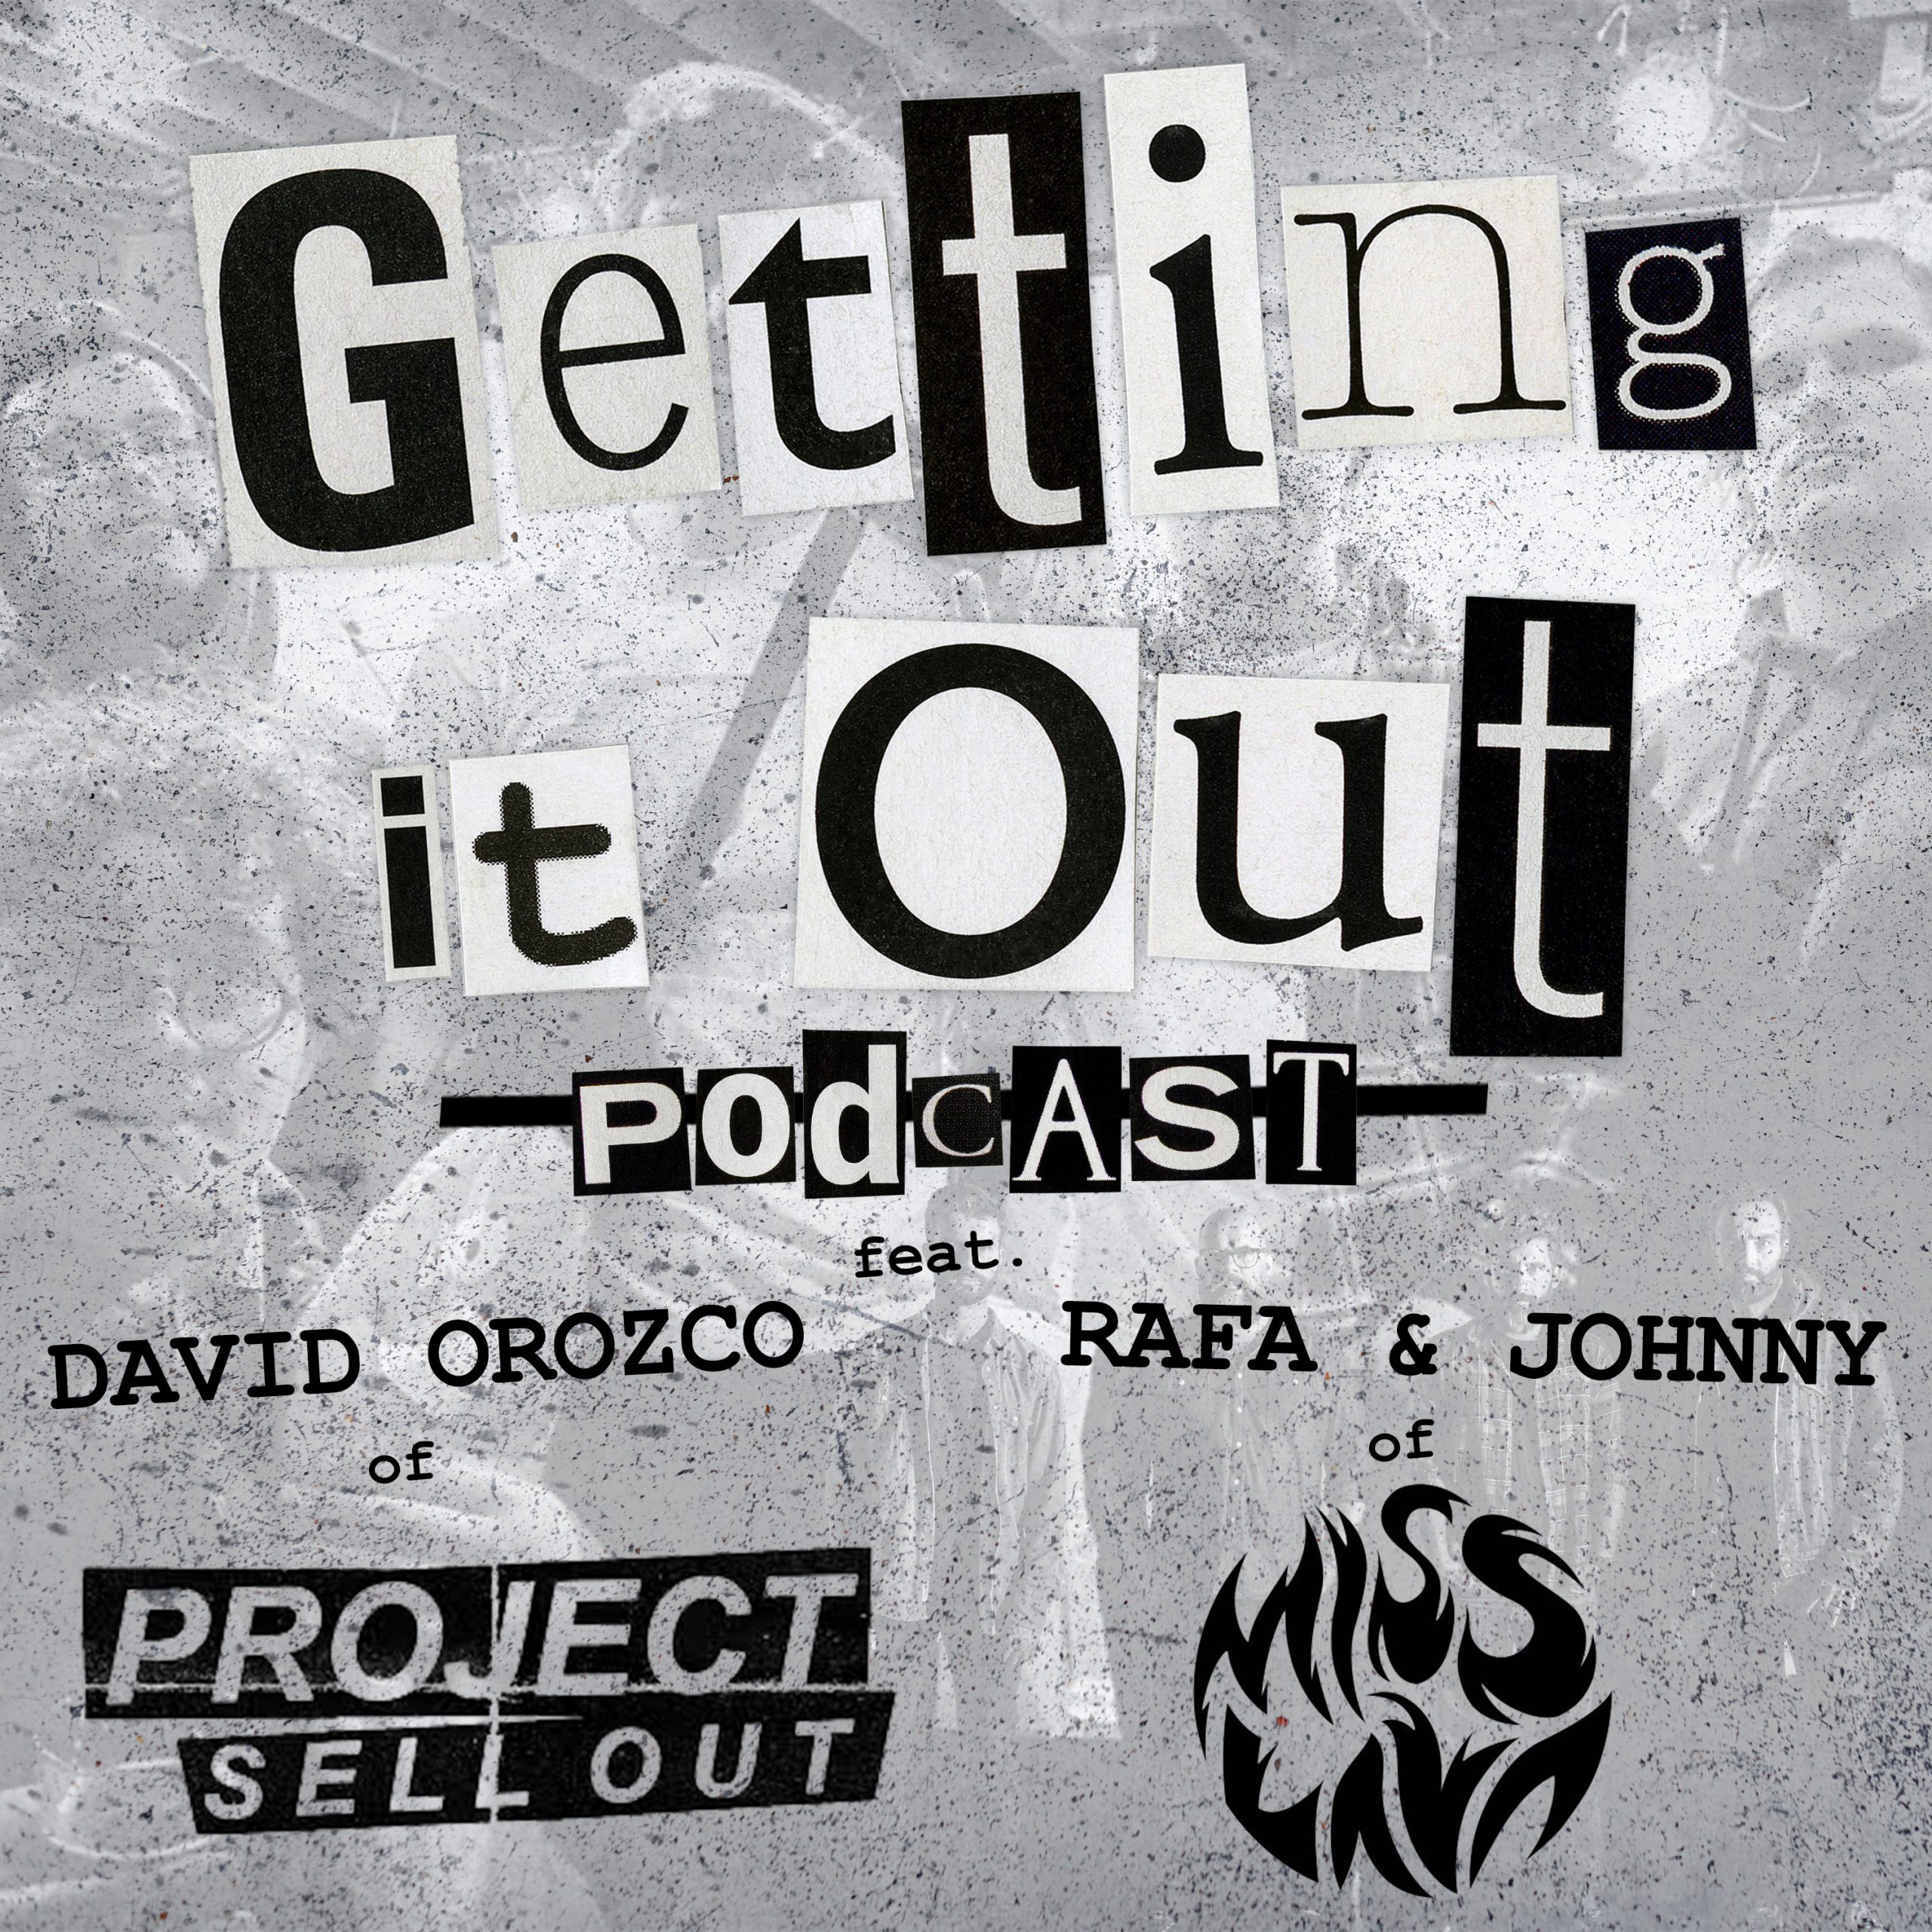 Episode 161 - Project Sell Out / Miss Lava